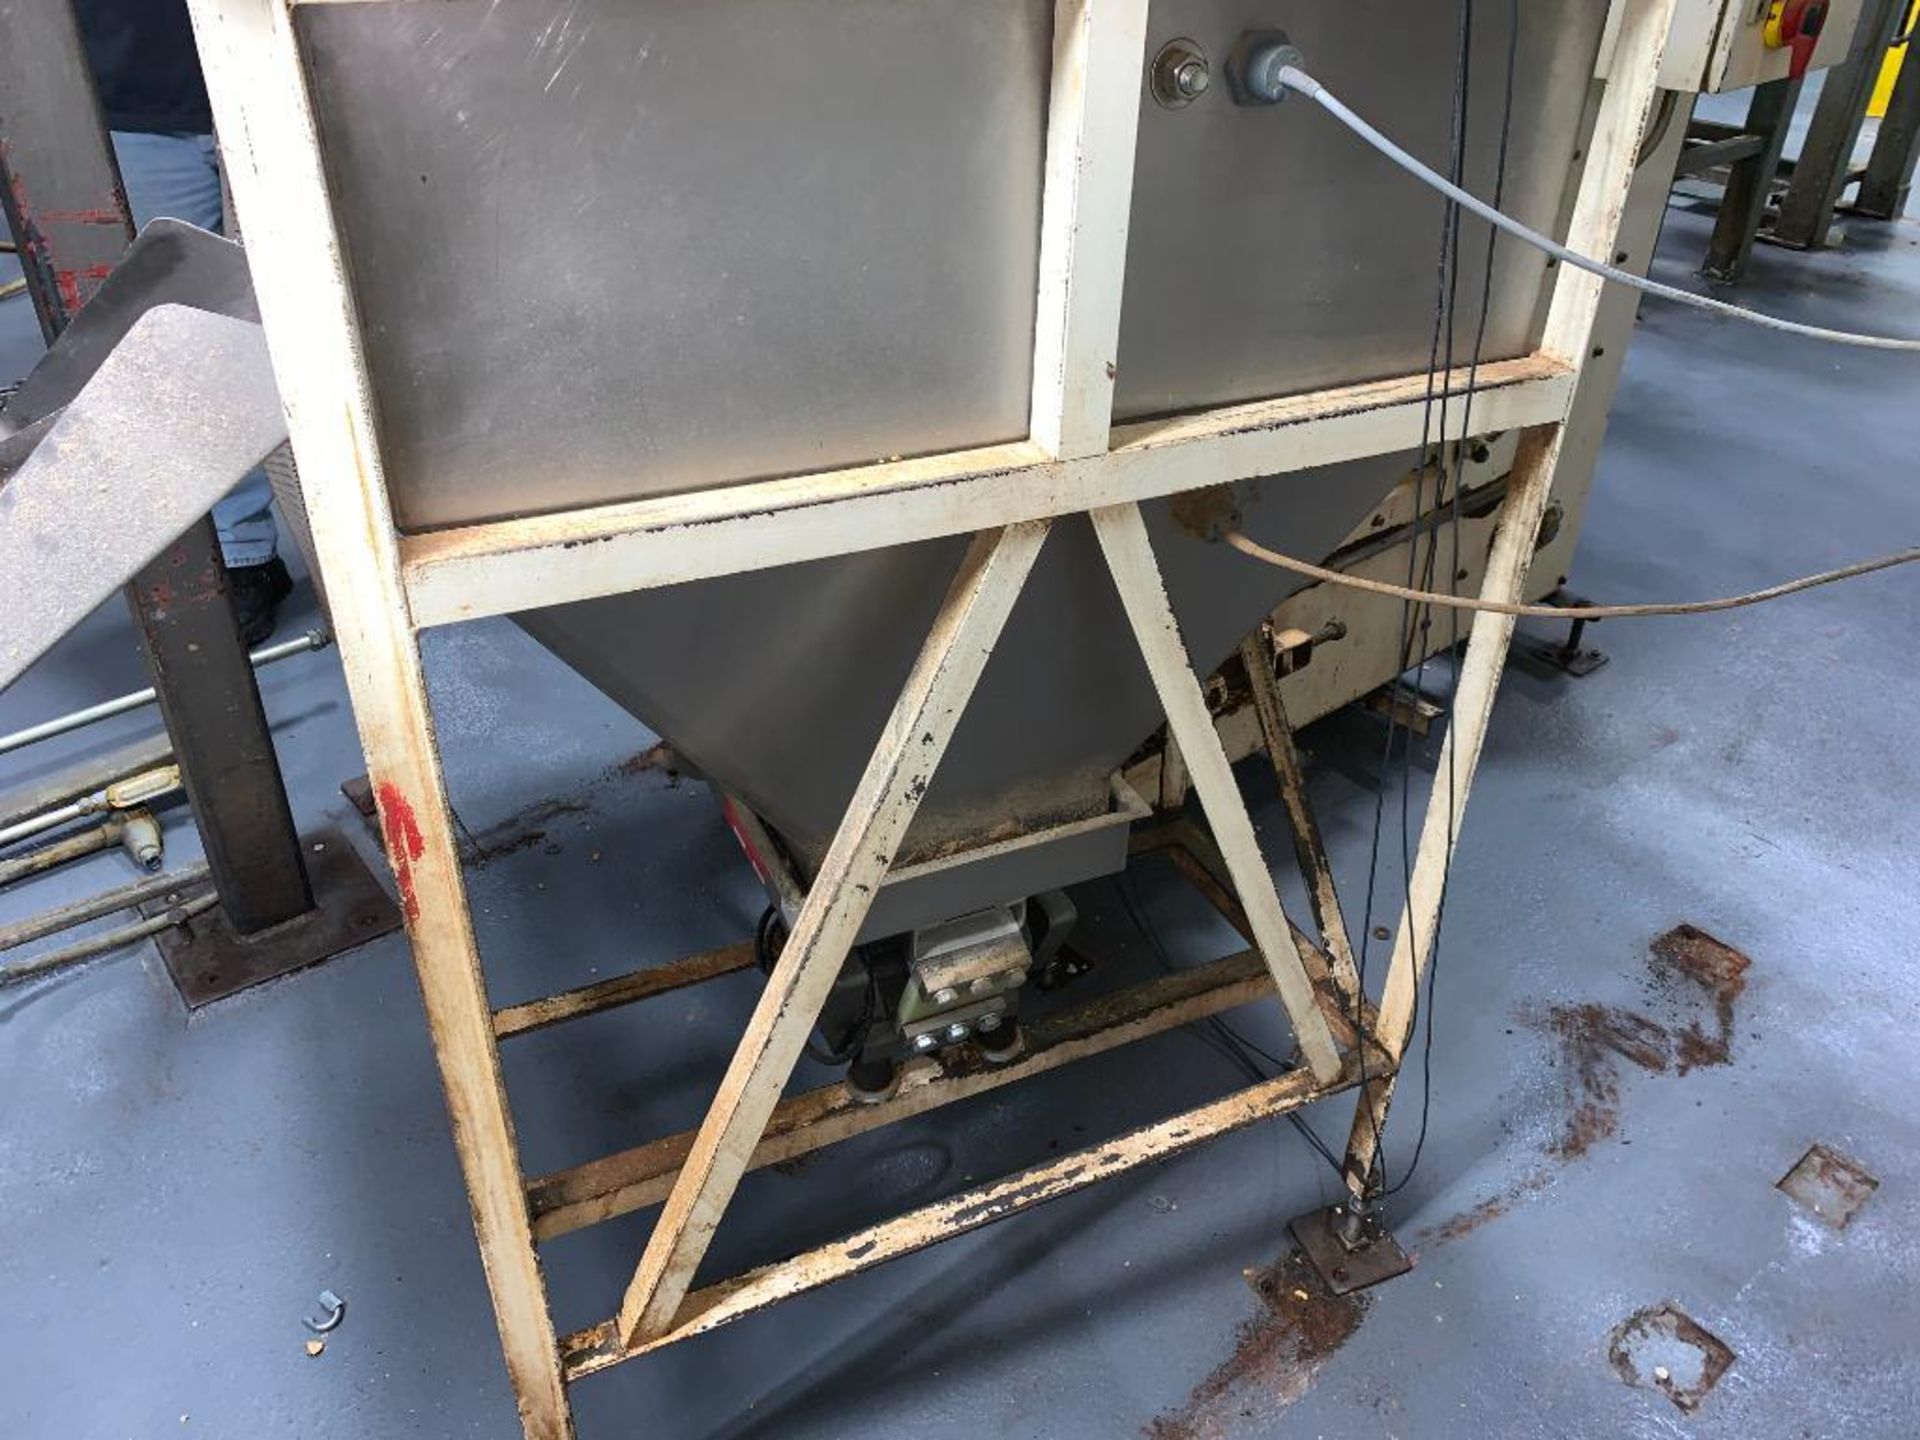 stainless steel hopper, 54 in. x 36 in. x 24 in., with 30 in. x 12 in. vibratory feeder on bottom - Image 3 of 11